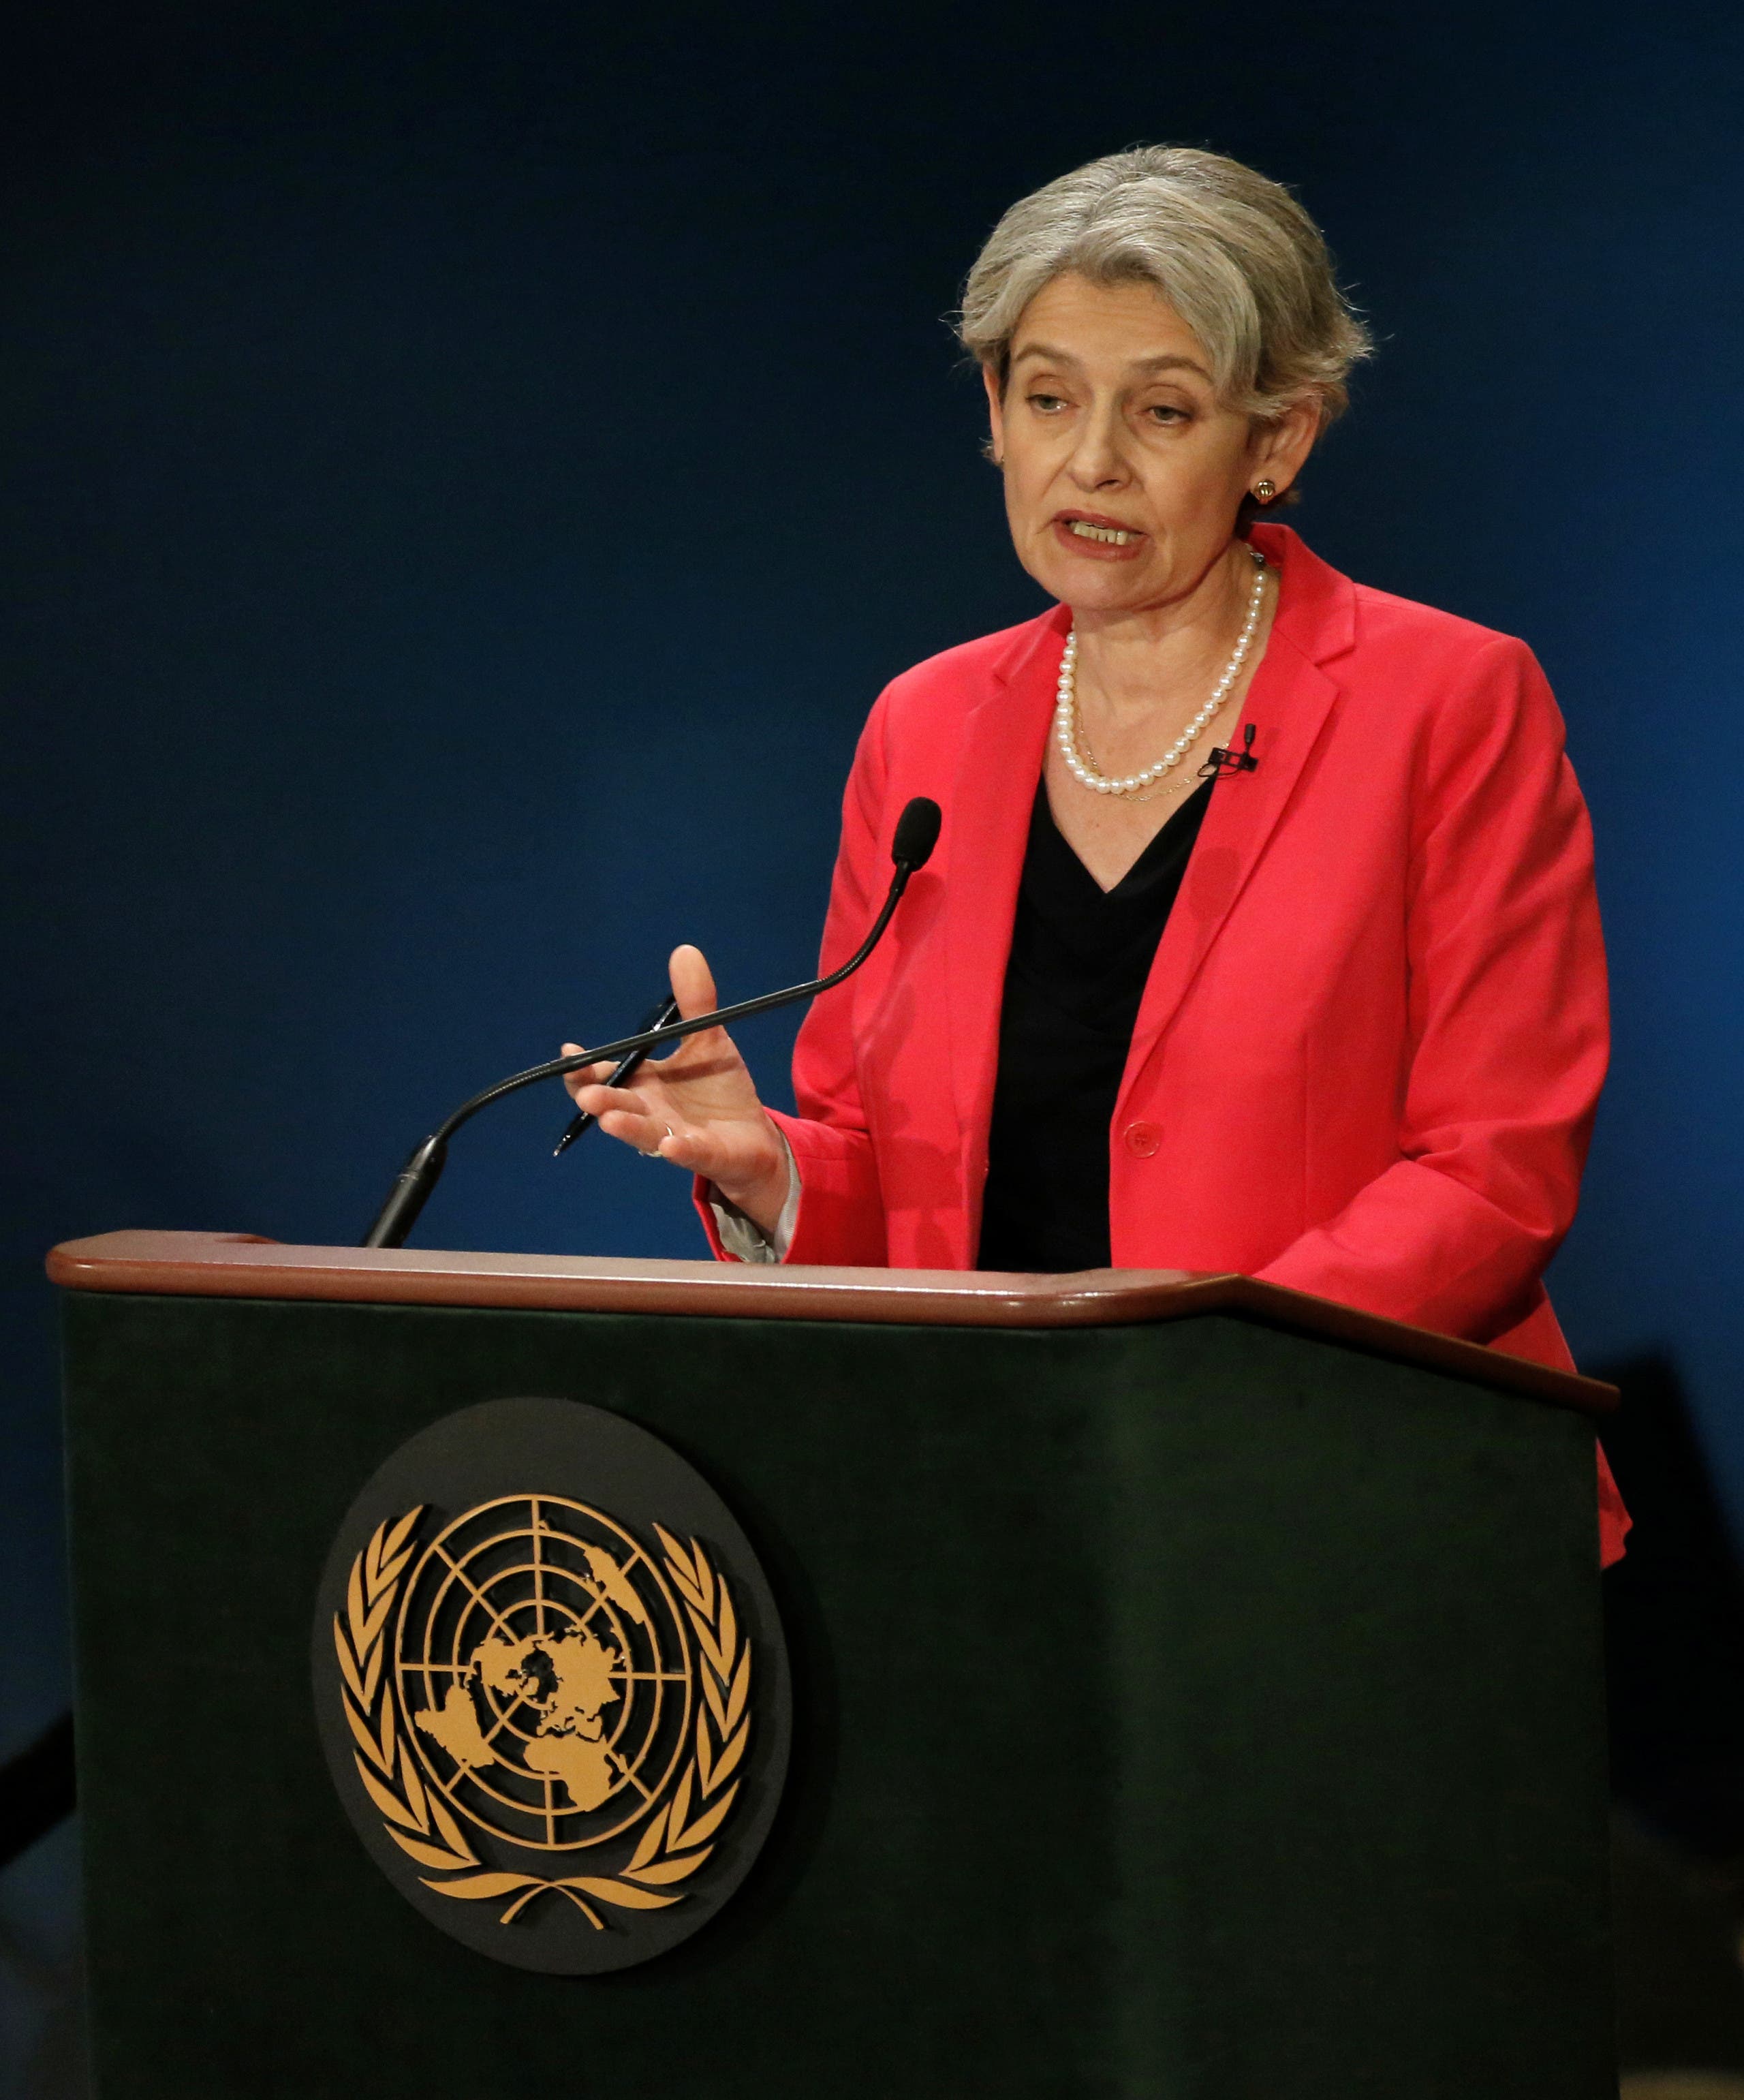 Former United Nations cultural organization UNESCO Director-General Irina Bokova of Bulgaria speaks during a debate in the United Nations General Assembly between candidates vying to be the next UN Secretary General at UN headquarters in Manhattan, New York, US, July 12, 2016. (File photo: Reuters)